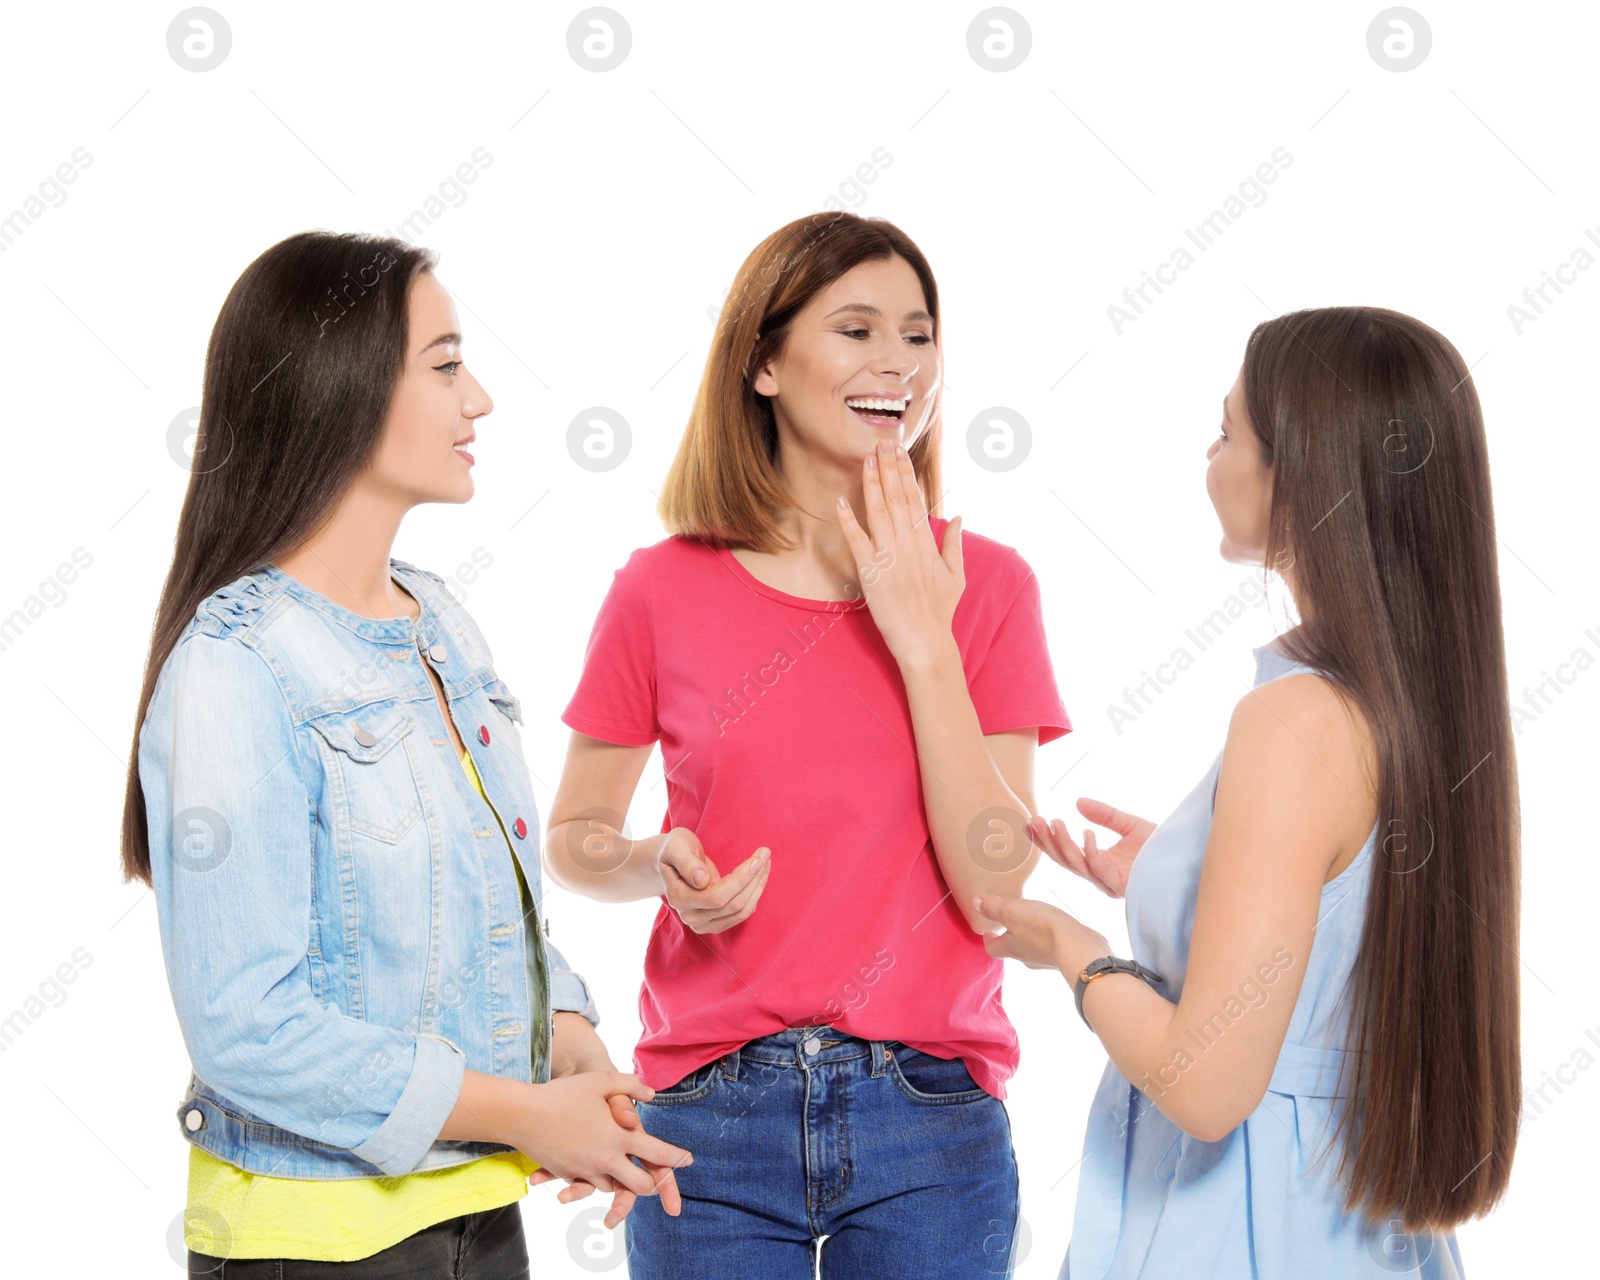 Photo of Hearing impaired friends using sign language for communication isolated on white